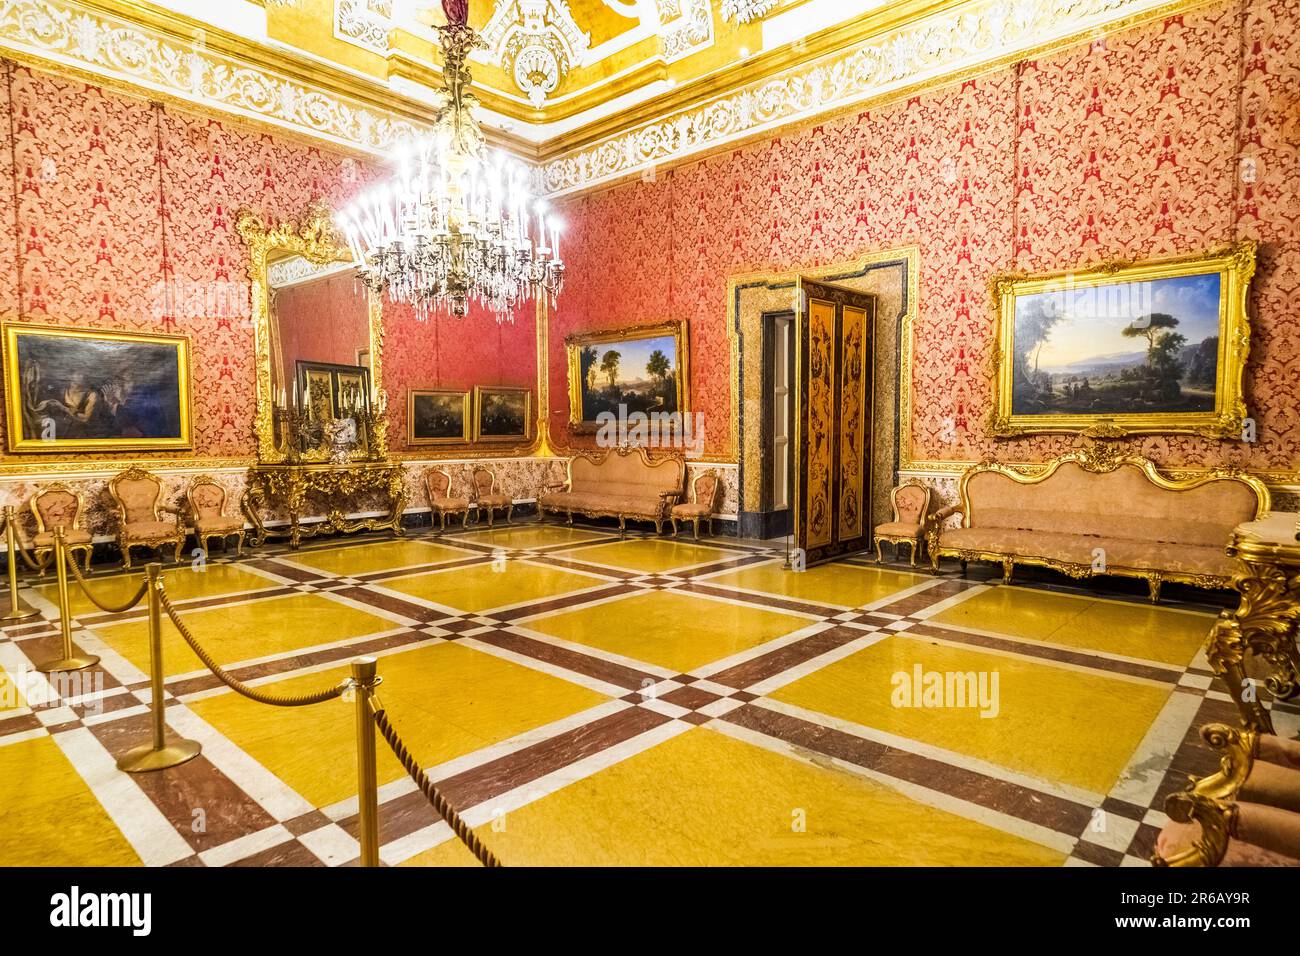 The Queen's room with his Neapolitans School paintings of the 17th-18th century - Royal Palace of Naples that In 1734 became the royal residence of the Bourbons - Naples, Italy Stock Photo